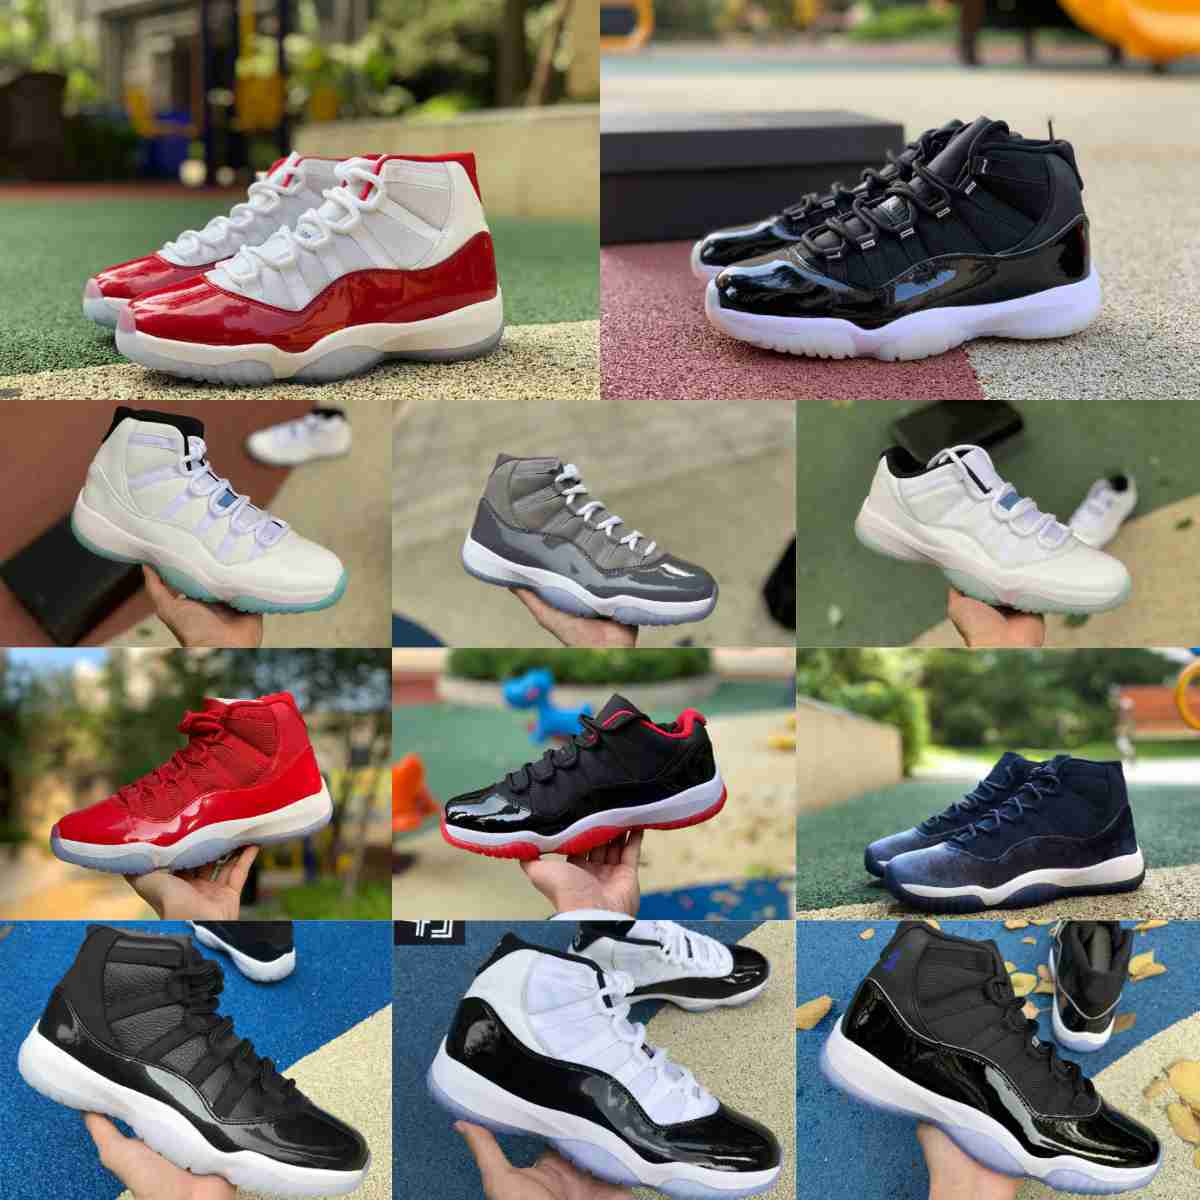 

Jumpman Cherry Red 11 11s High Basketball Shoes 25th Anniversary Midnight Navy Barons Legend Blue COOL GREY Midnight Navy Low Columbia Concord 45 Trainer Sneakers S8, Please contact us